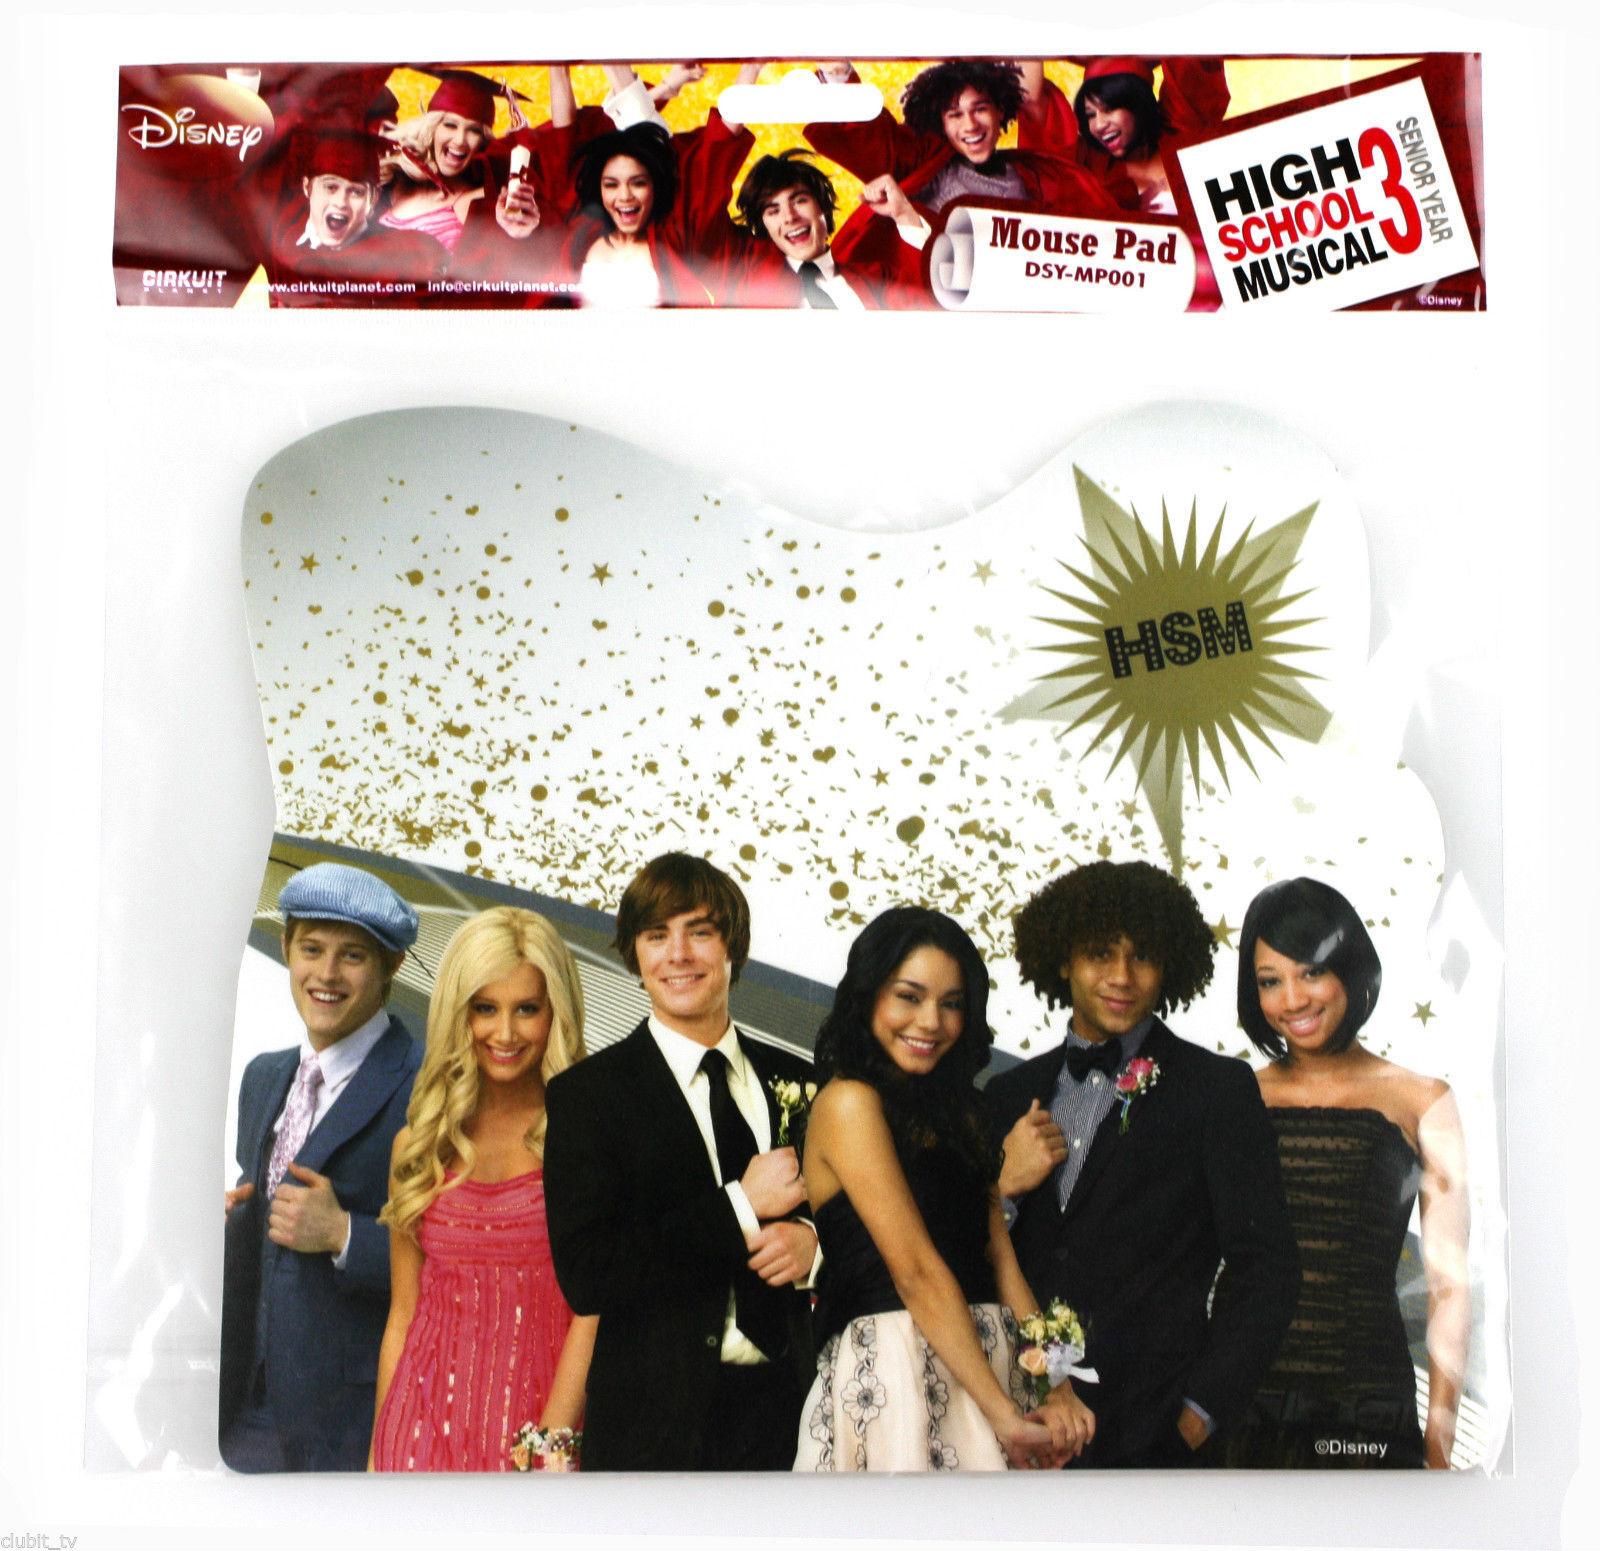 Disney High School Musical 3 HSM PC Computer Mouse Mat / Pad DSY-MP001 NEW